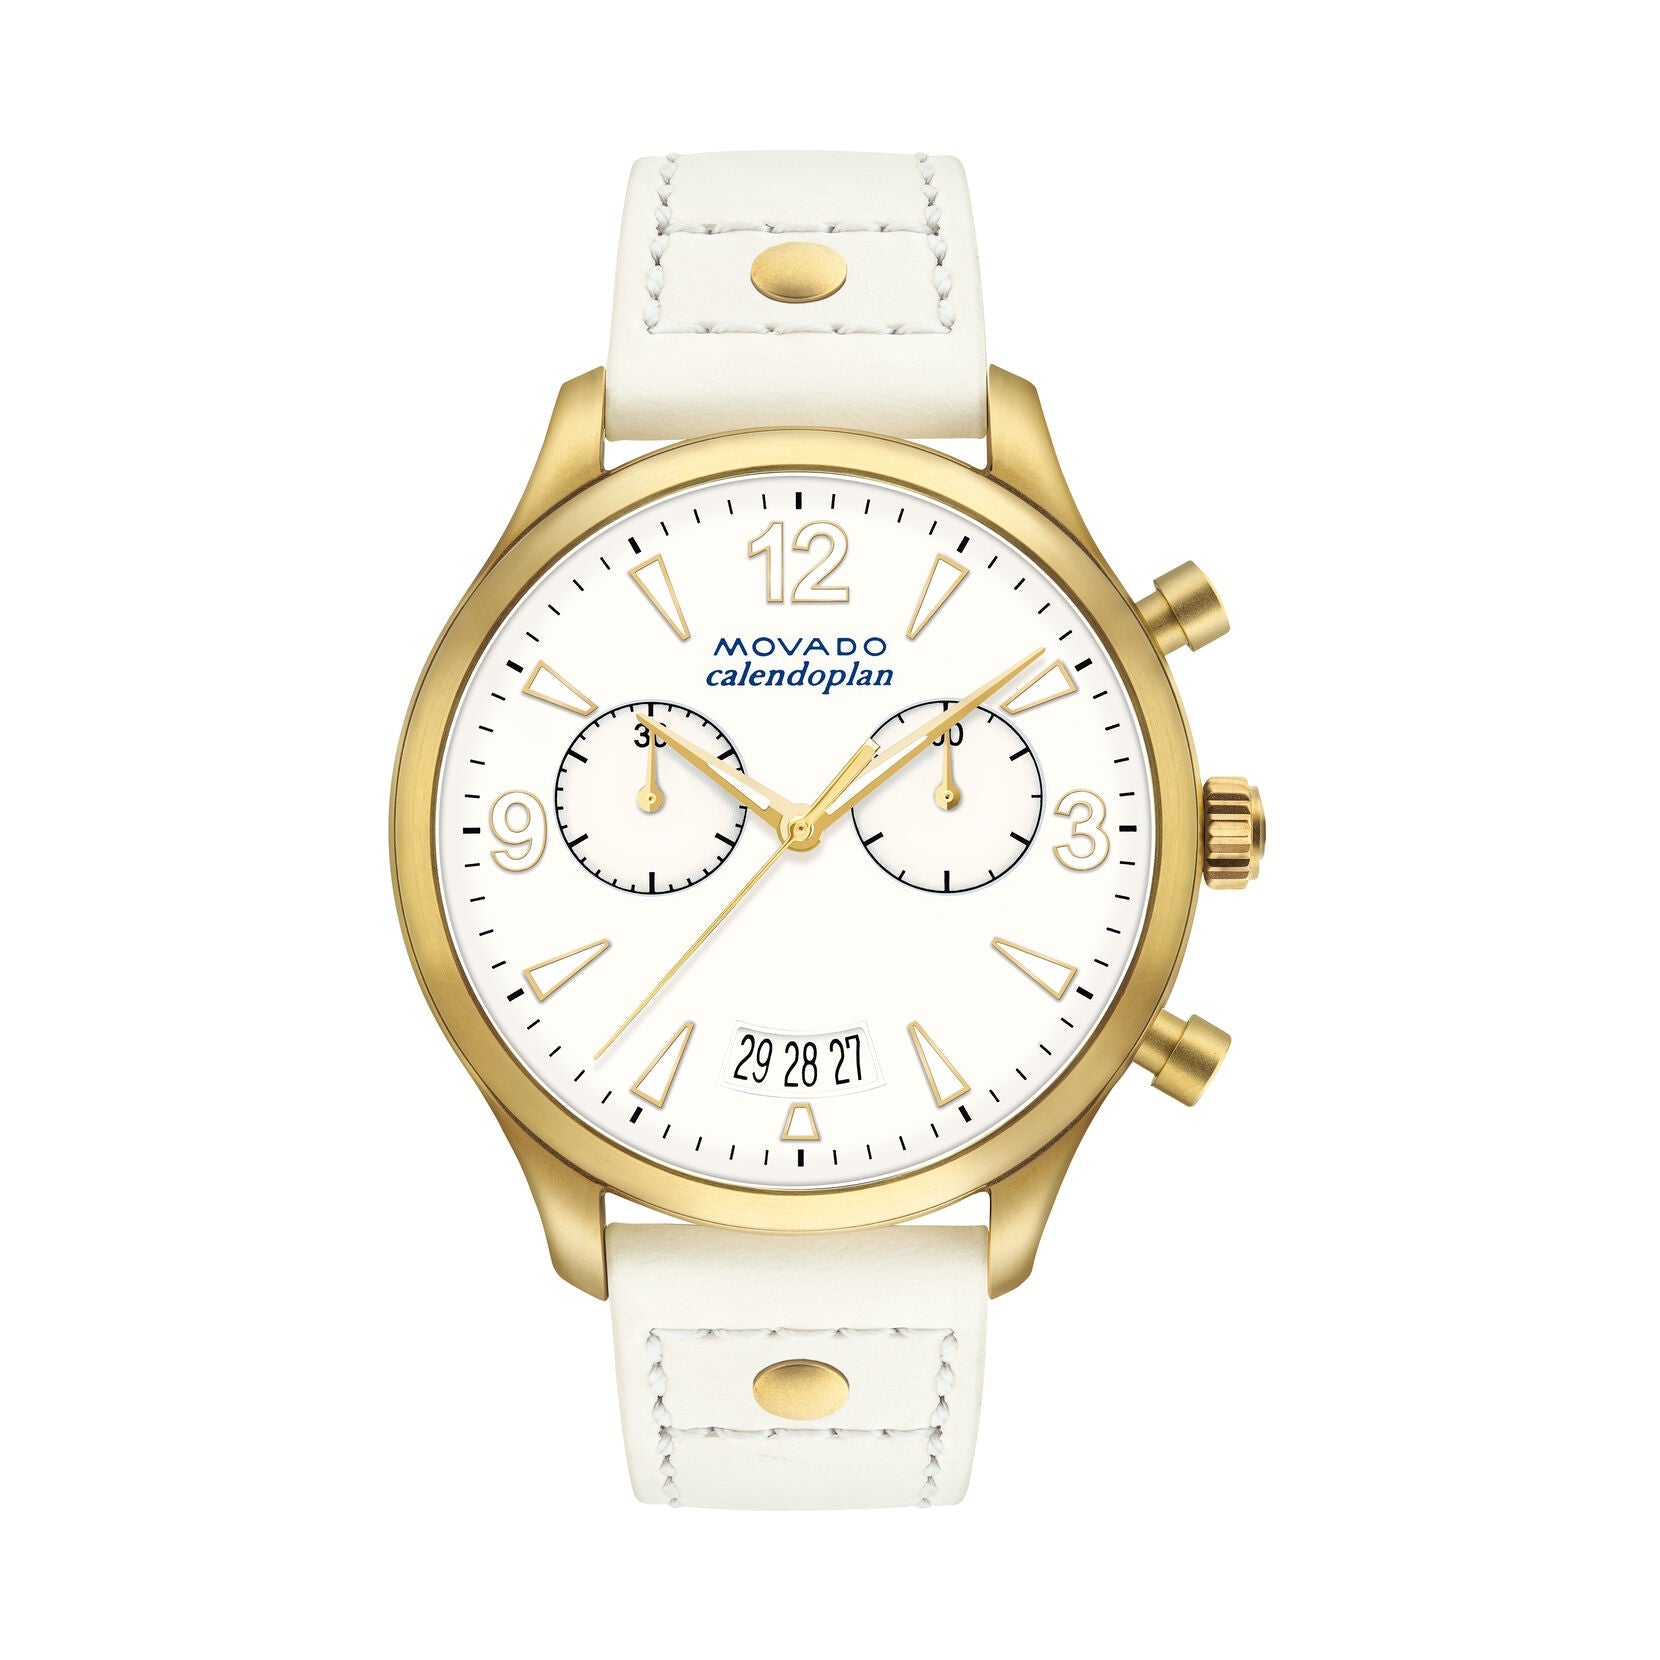 Movado Heritage Chronograph White Dial Ladies Watch 3650026